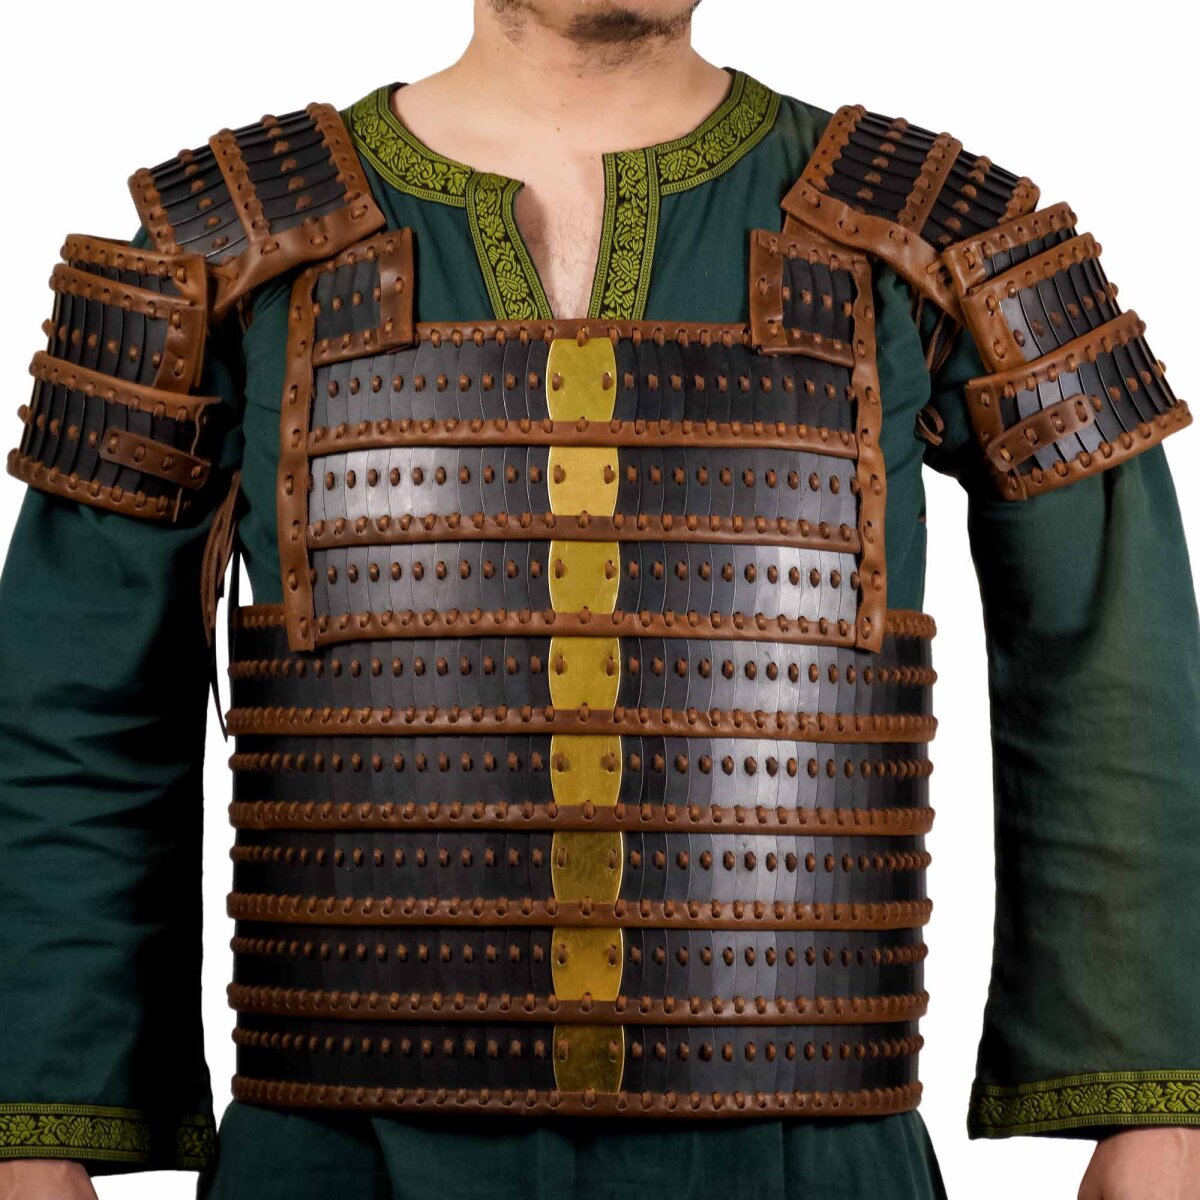 Viking Lamellar Armour for Shoulder and Body Protection